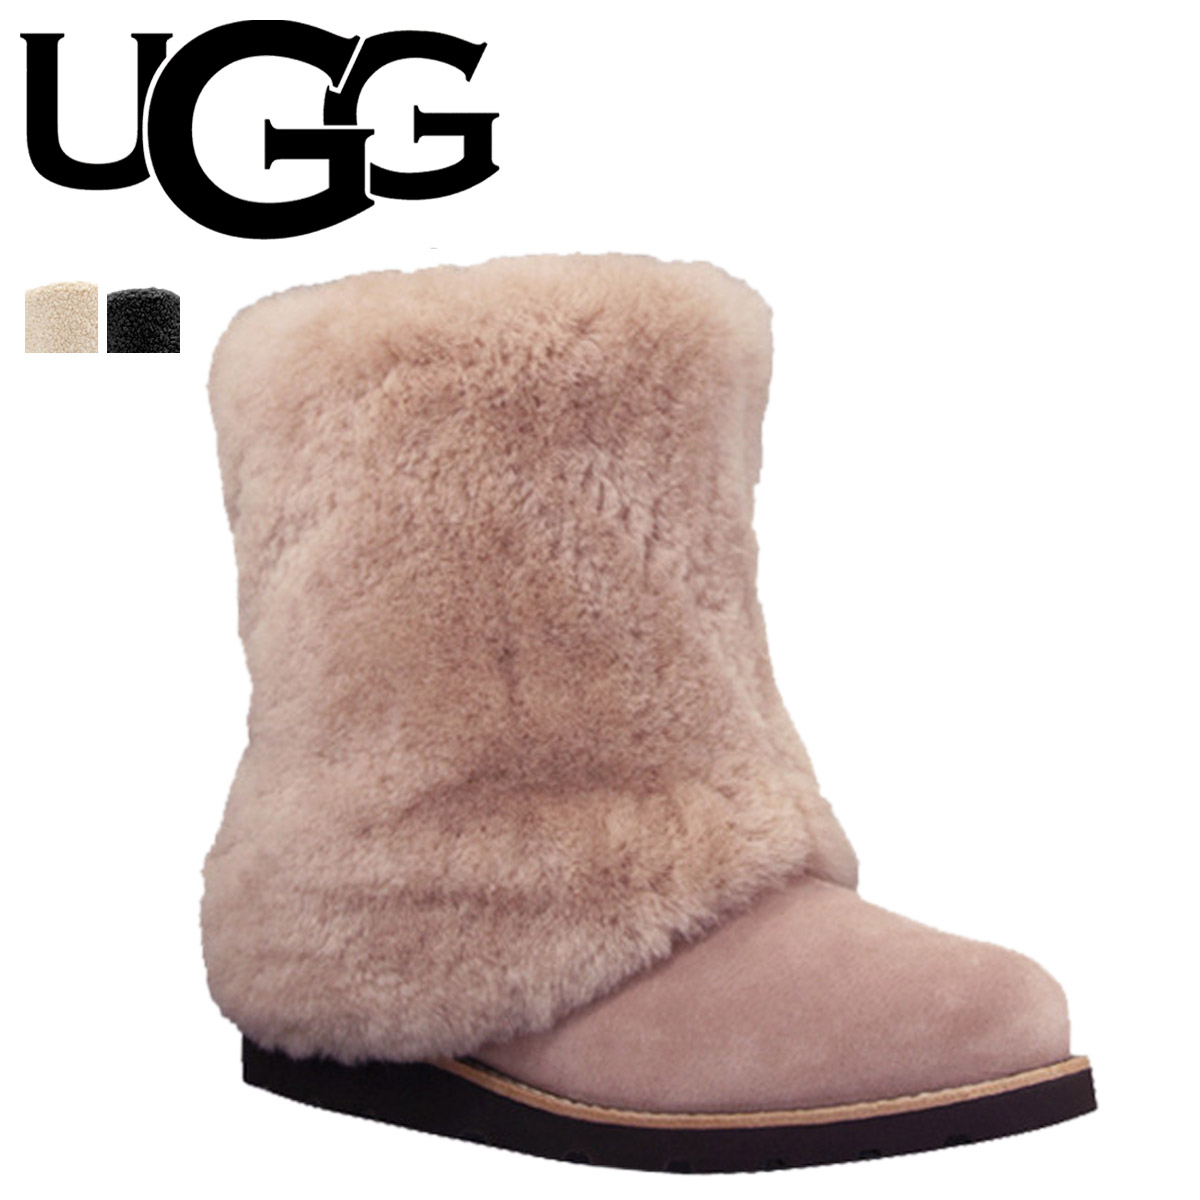 stores that carry uggs near me